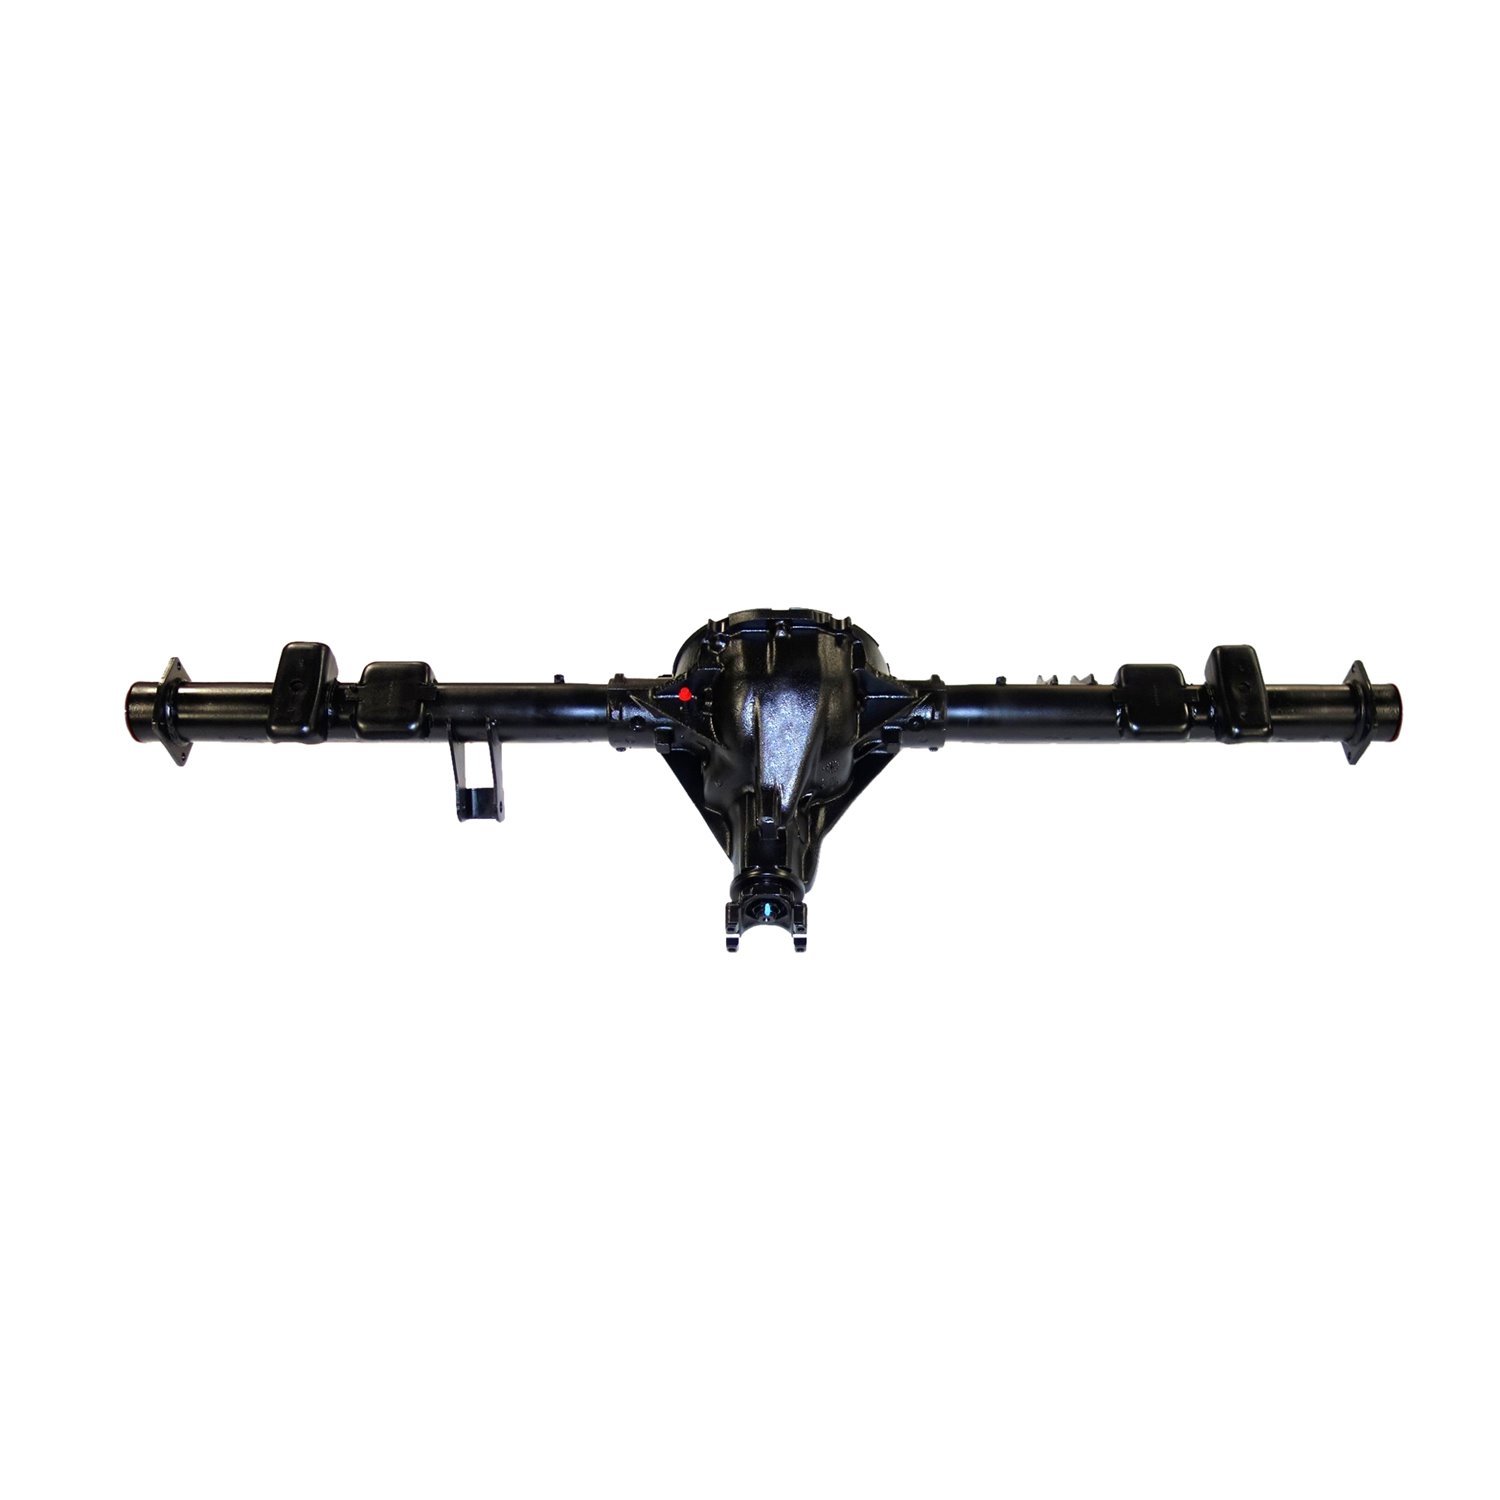 Remanufactured Complete Rear Axle Assembly 1992-2000 GM 8.5" 3.73 Ratio